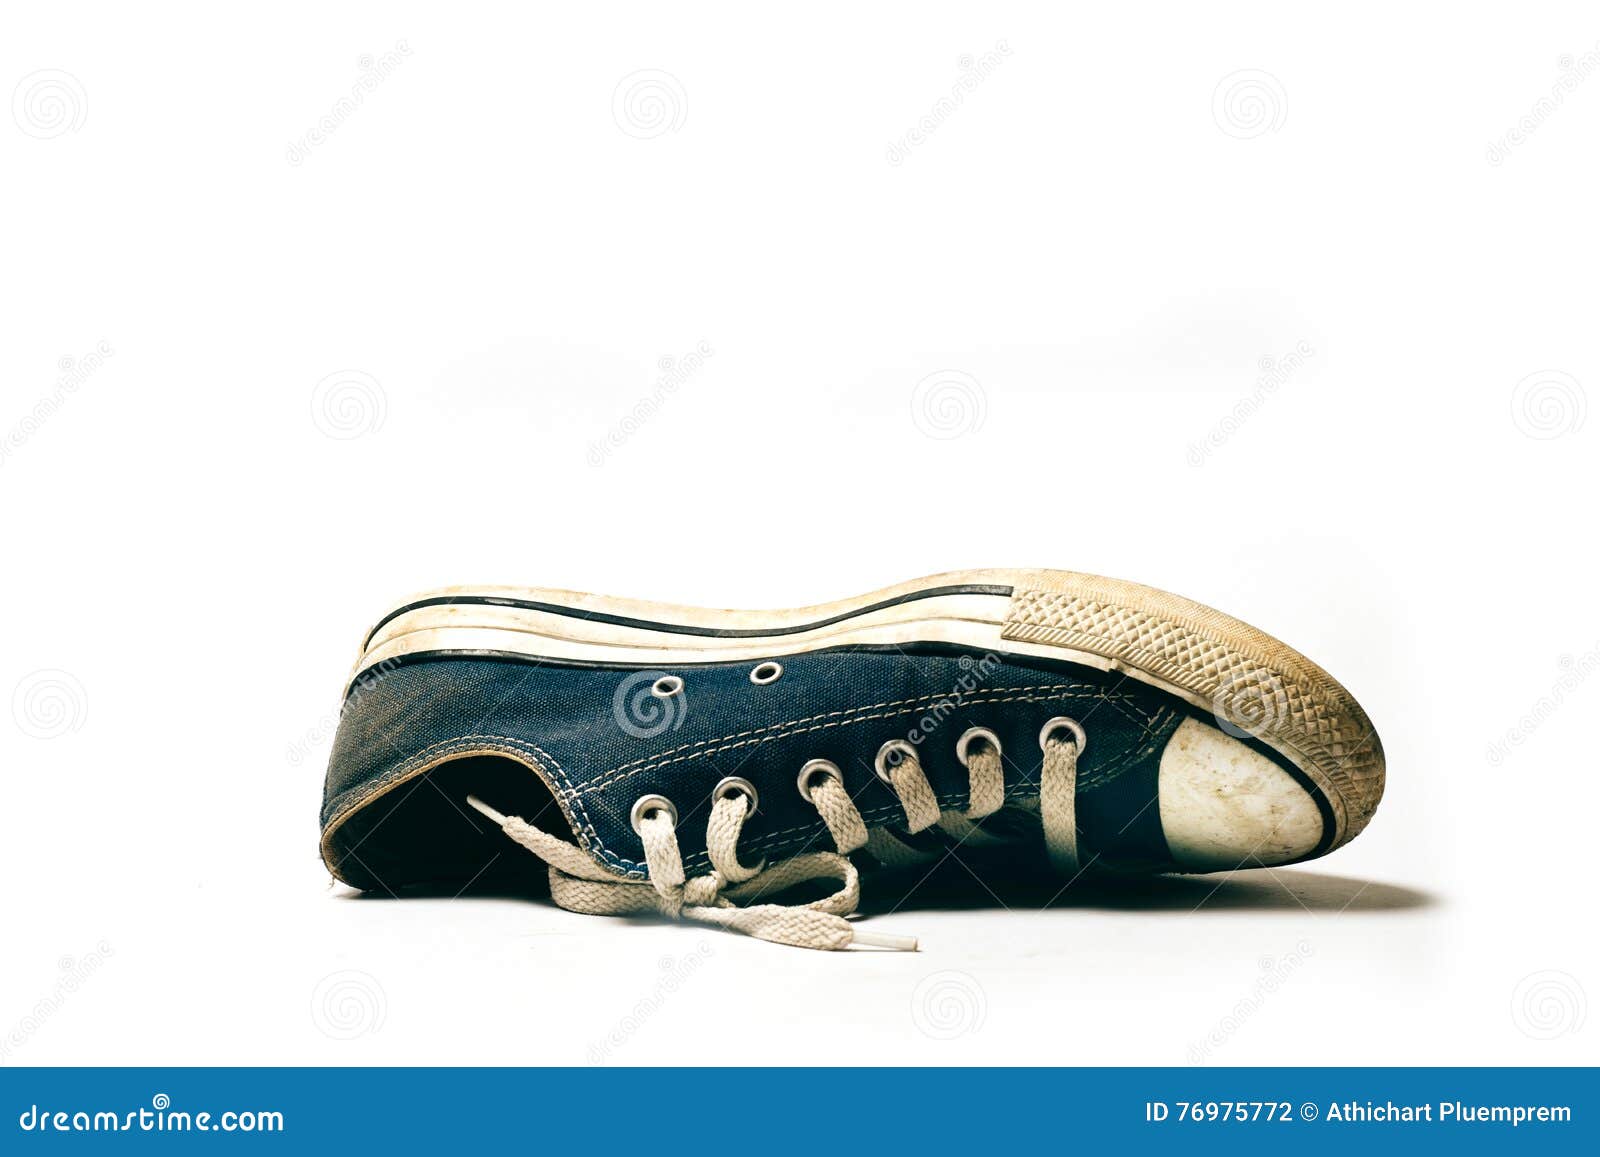 Old & Dirty Shoes Isolated On White Background Stock Photo - Image of ...